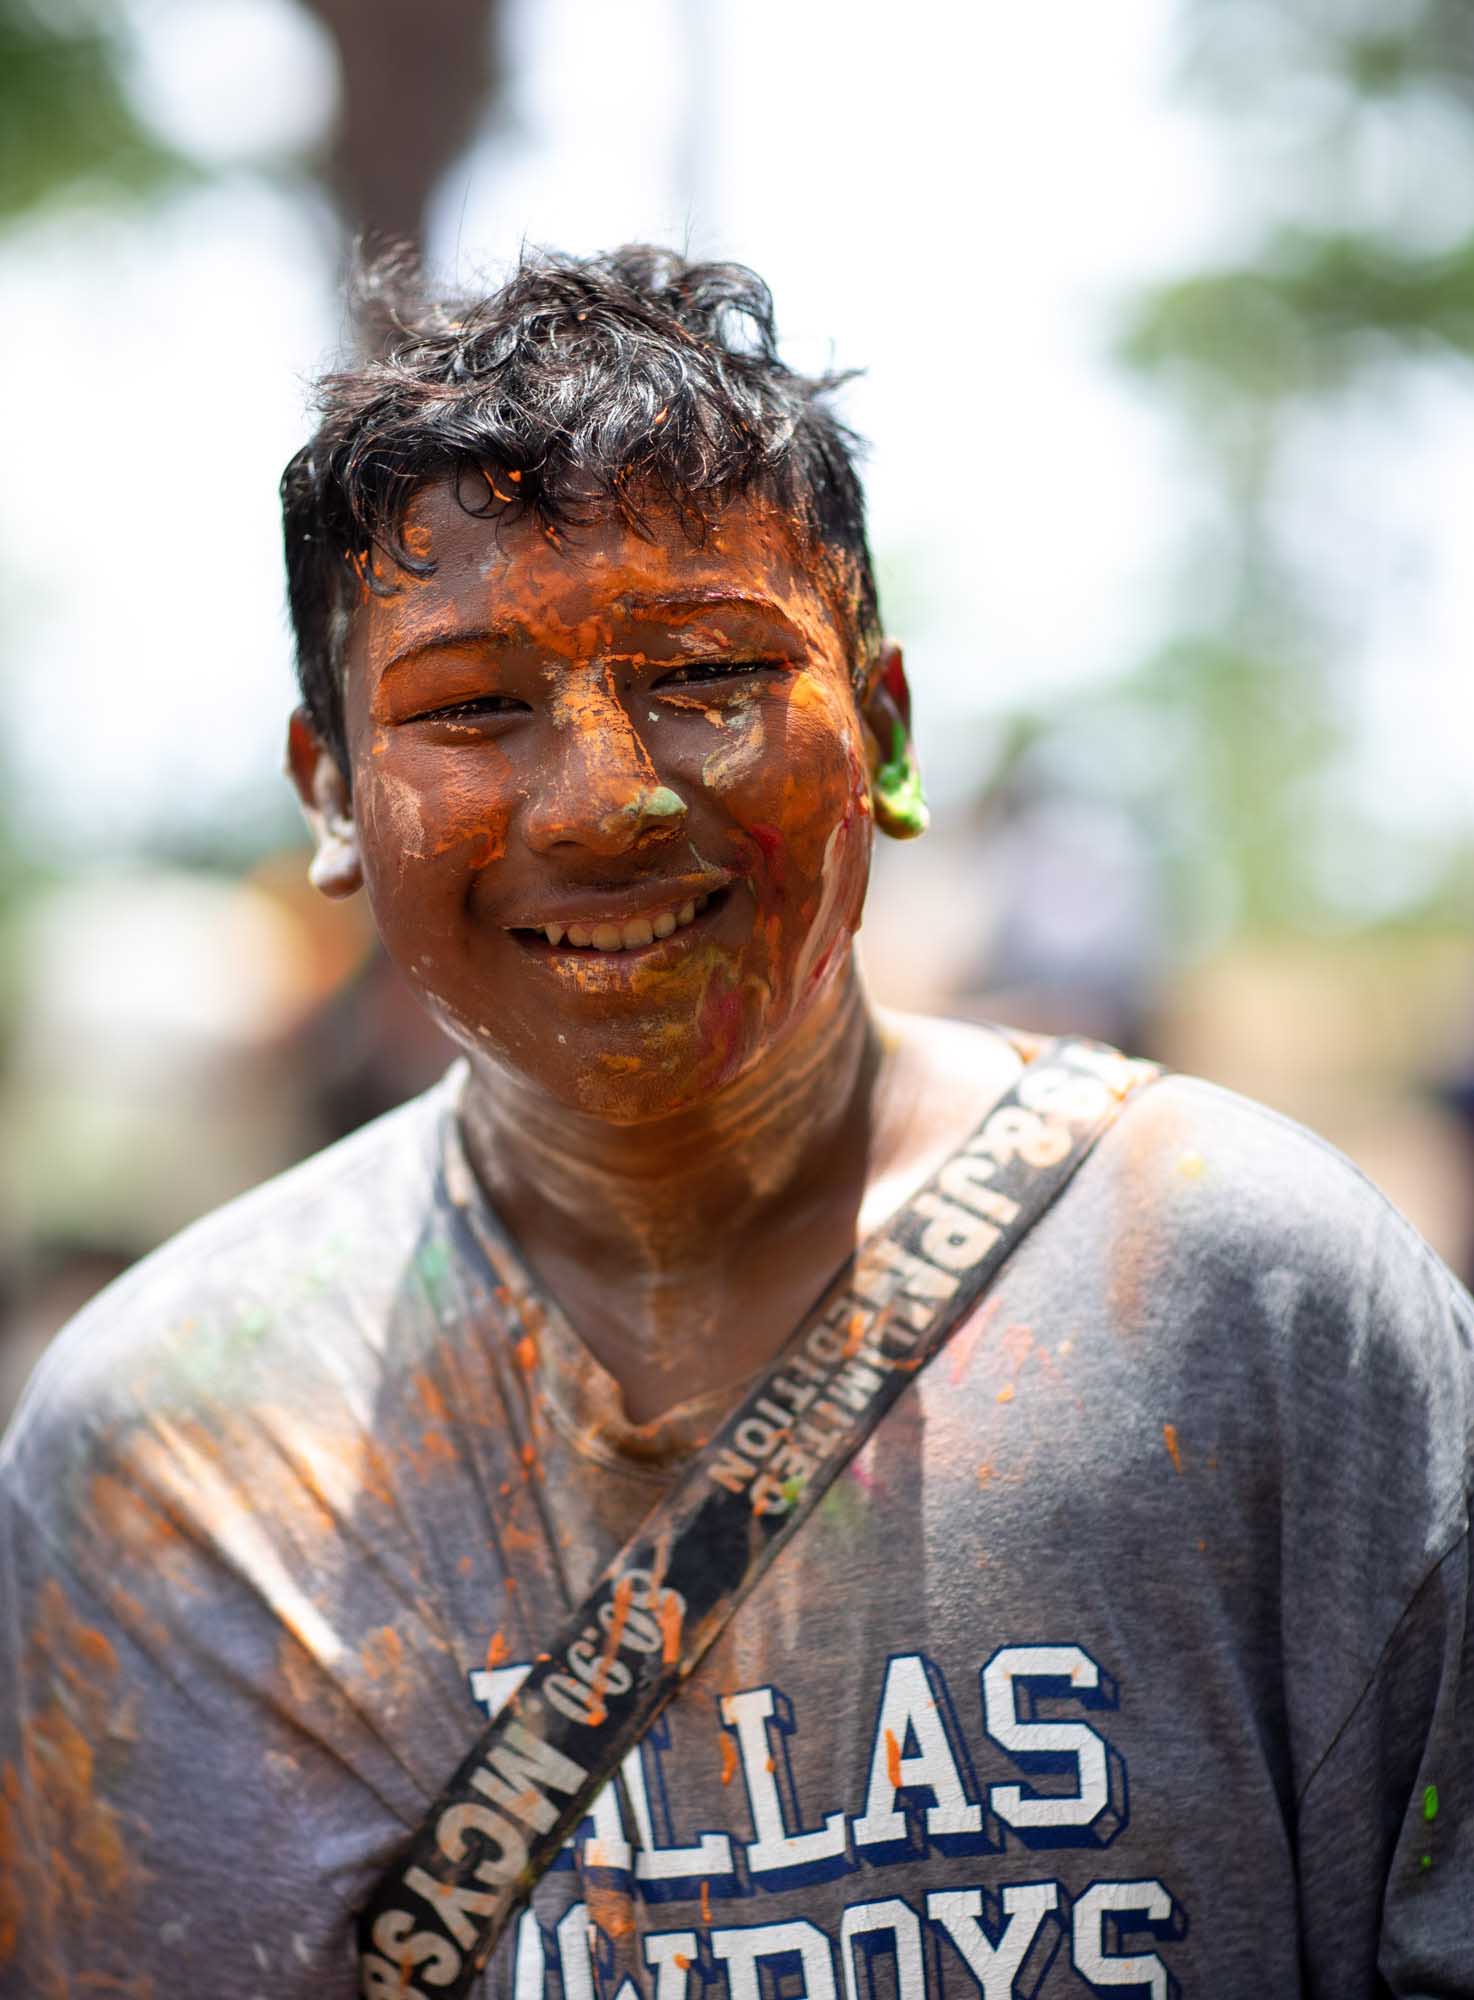 Smiling young man with paint on his face at Songkran water festival in Phuket, Thailand